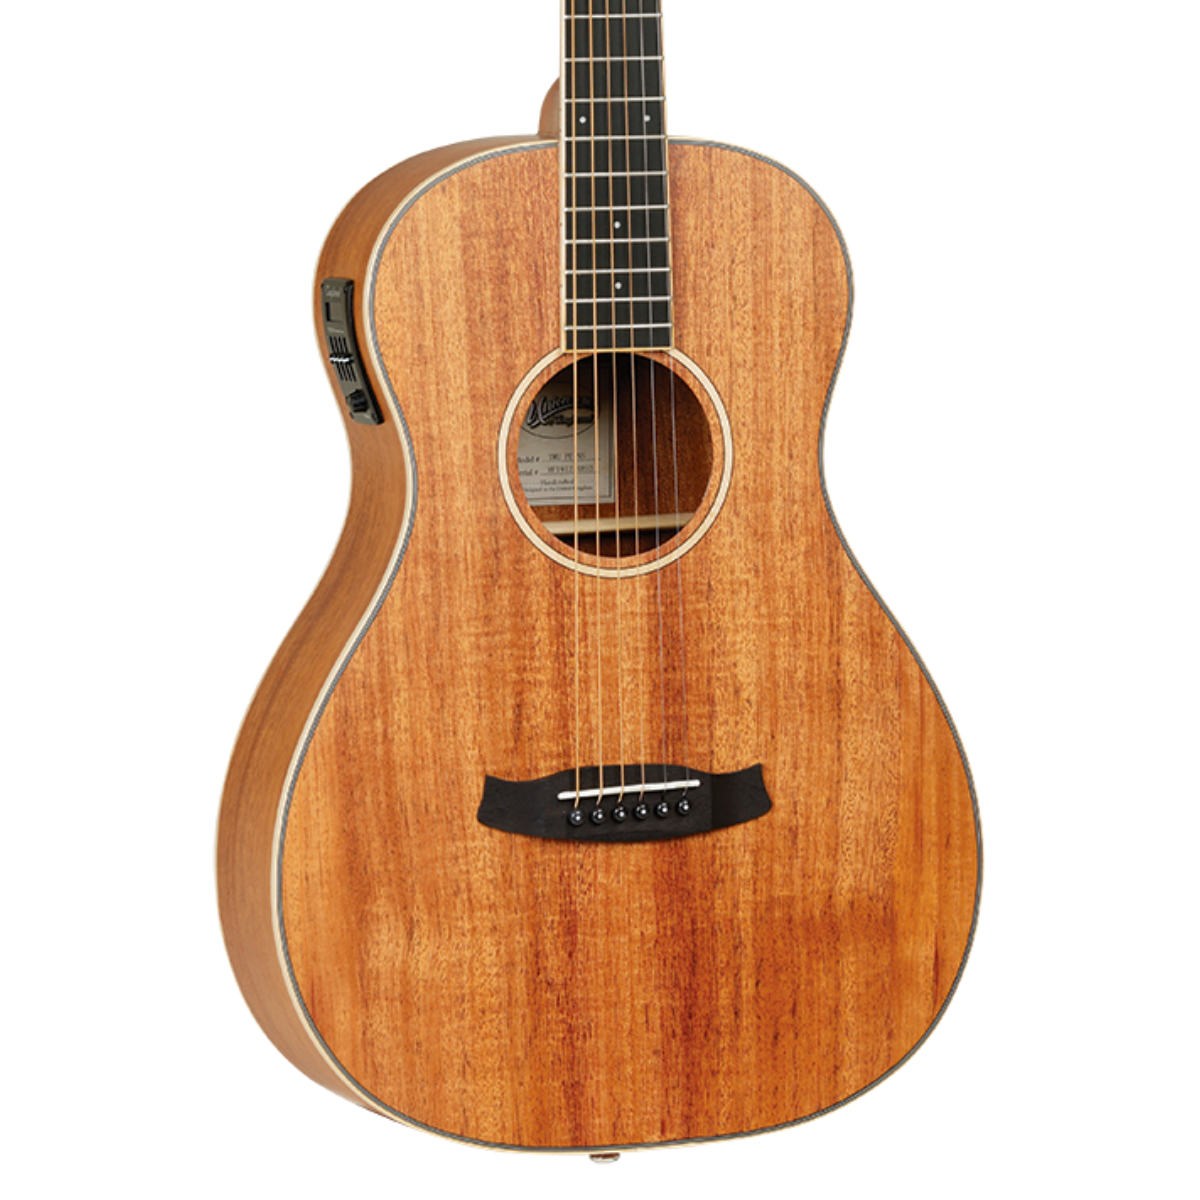 Tanglewood Union Parlor Acoustic Guitar